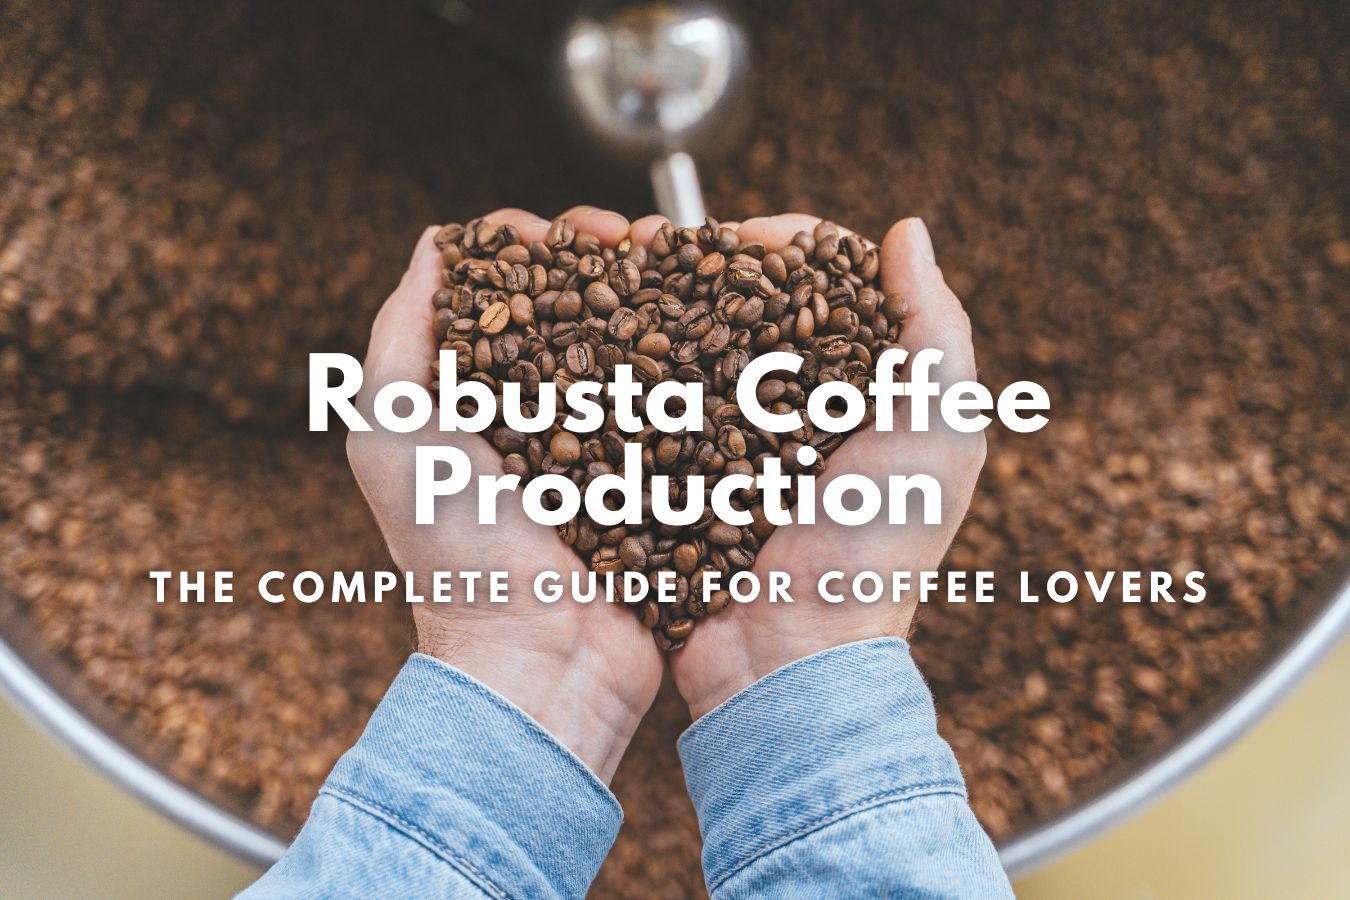 Robusta Coffee Production The Complete Guide for Coffee Lovers